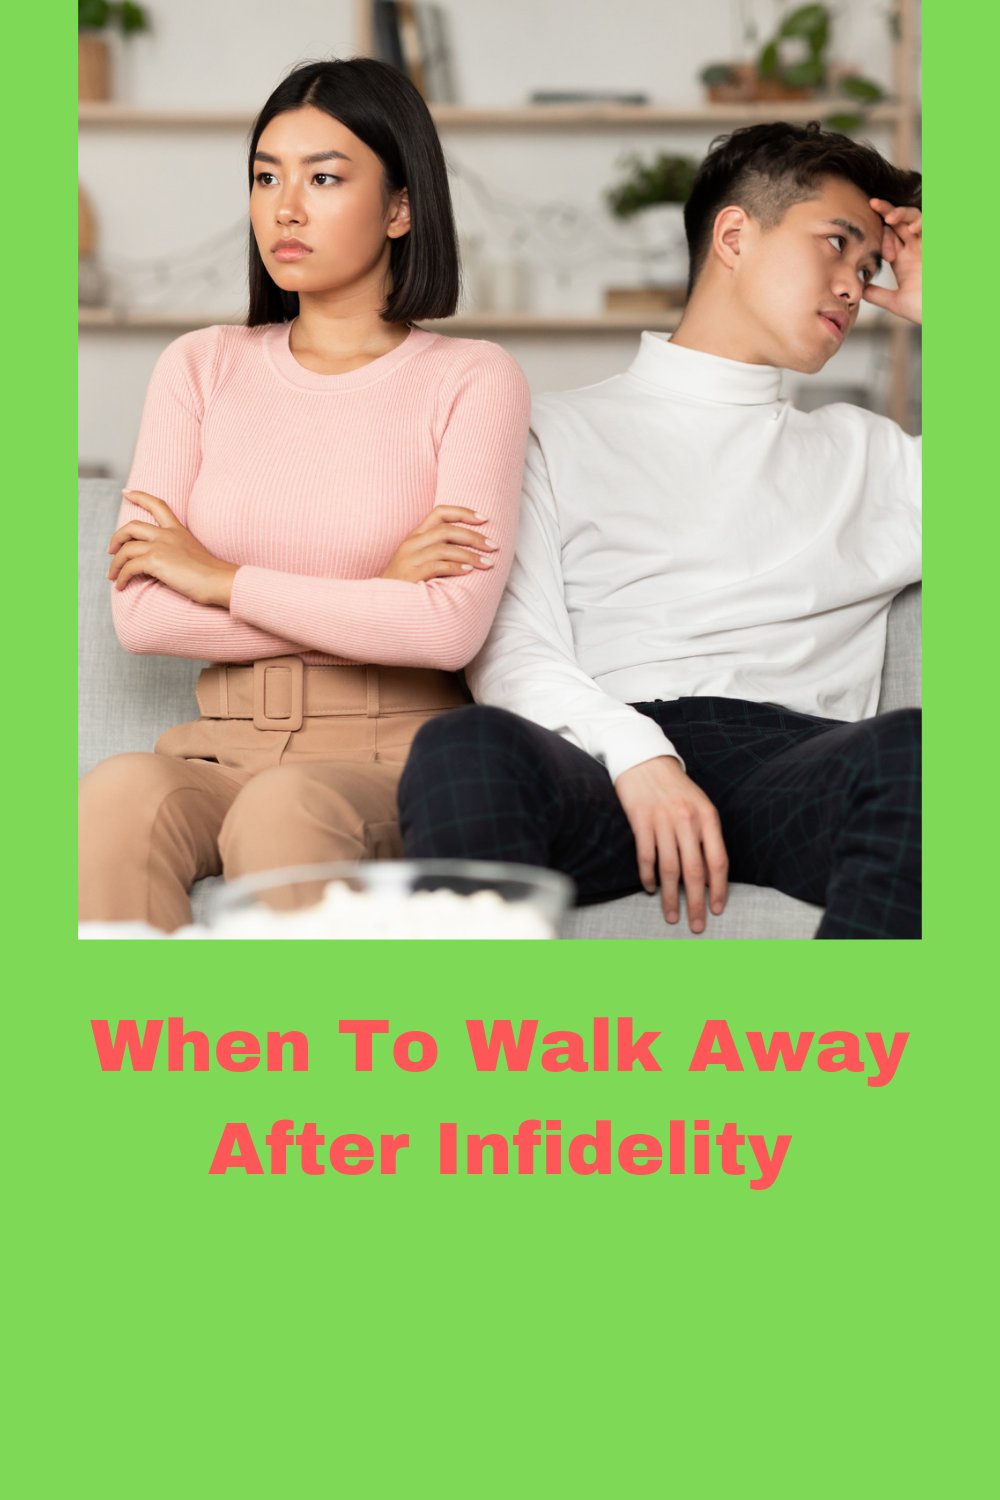 When To Walk Away After Infidelity